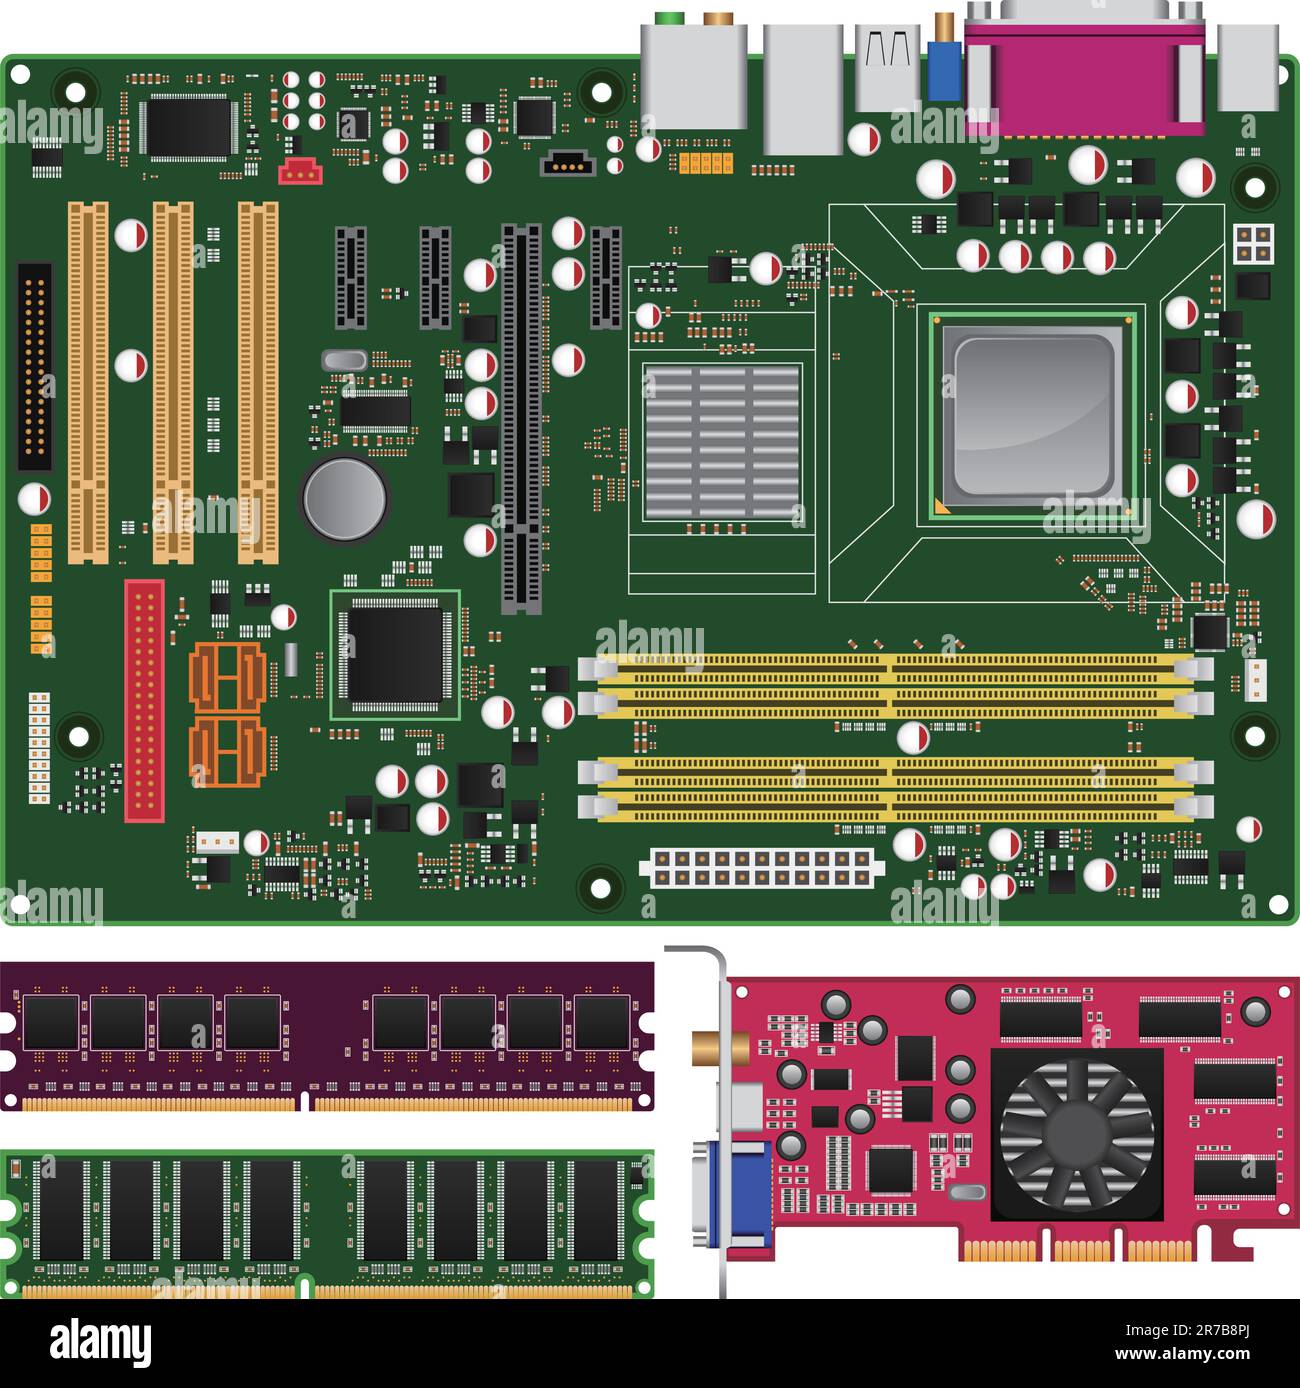 Layered vector illustration of Mainboard,Memory and Graphics Card. Stock Vector